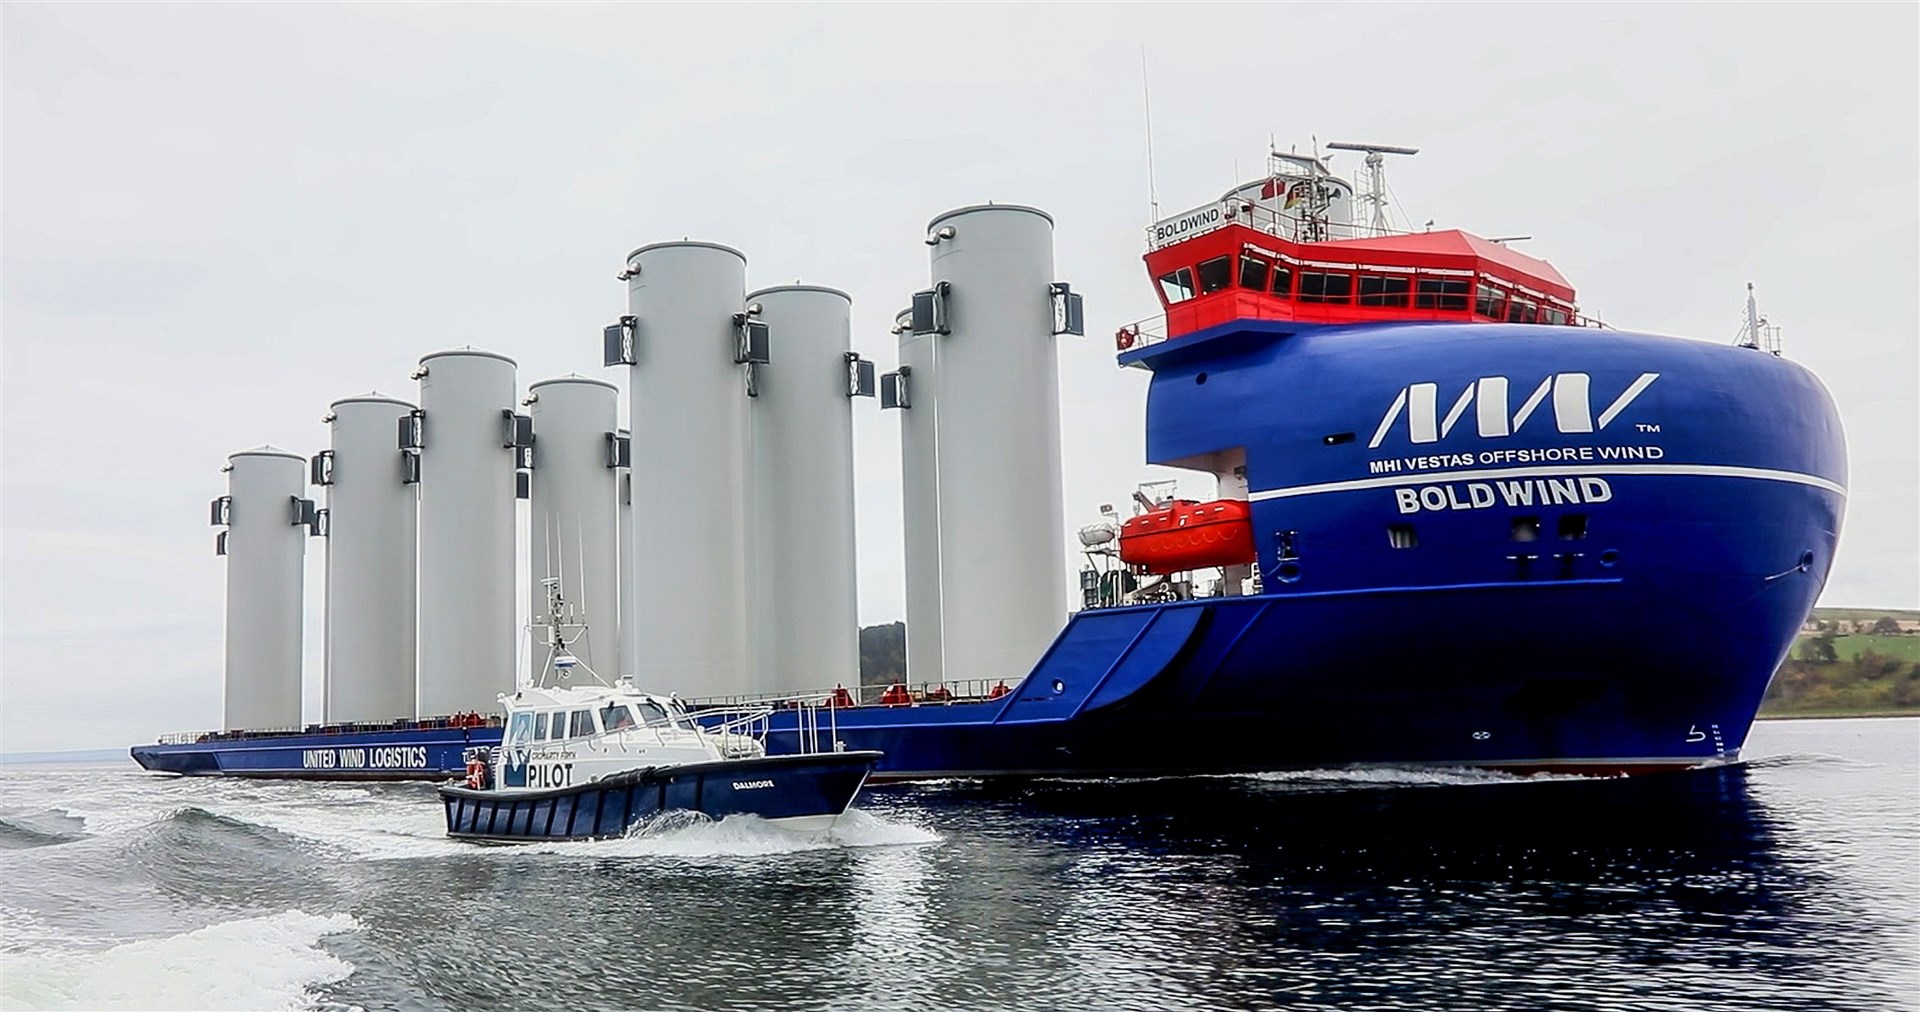 The MHI Boldwind brings Moray East wind farm turbine components to the Moray Firth.